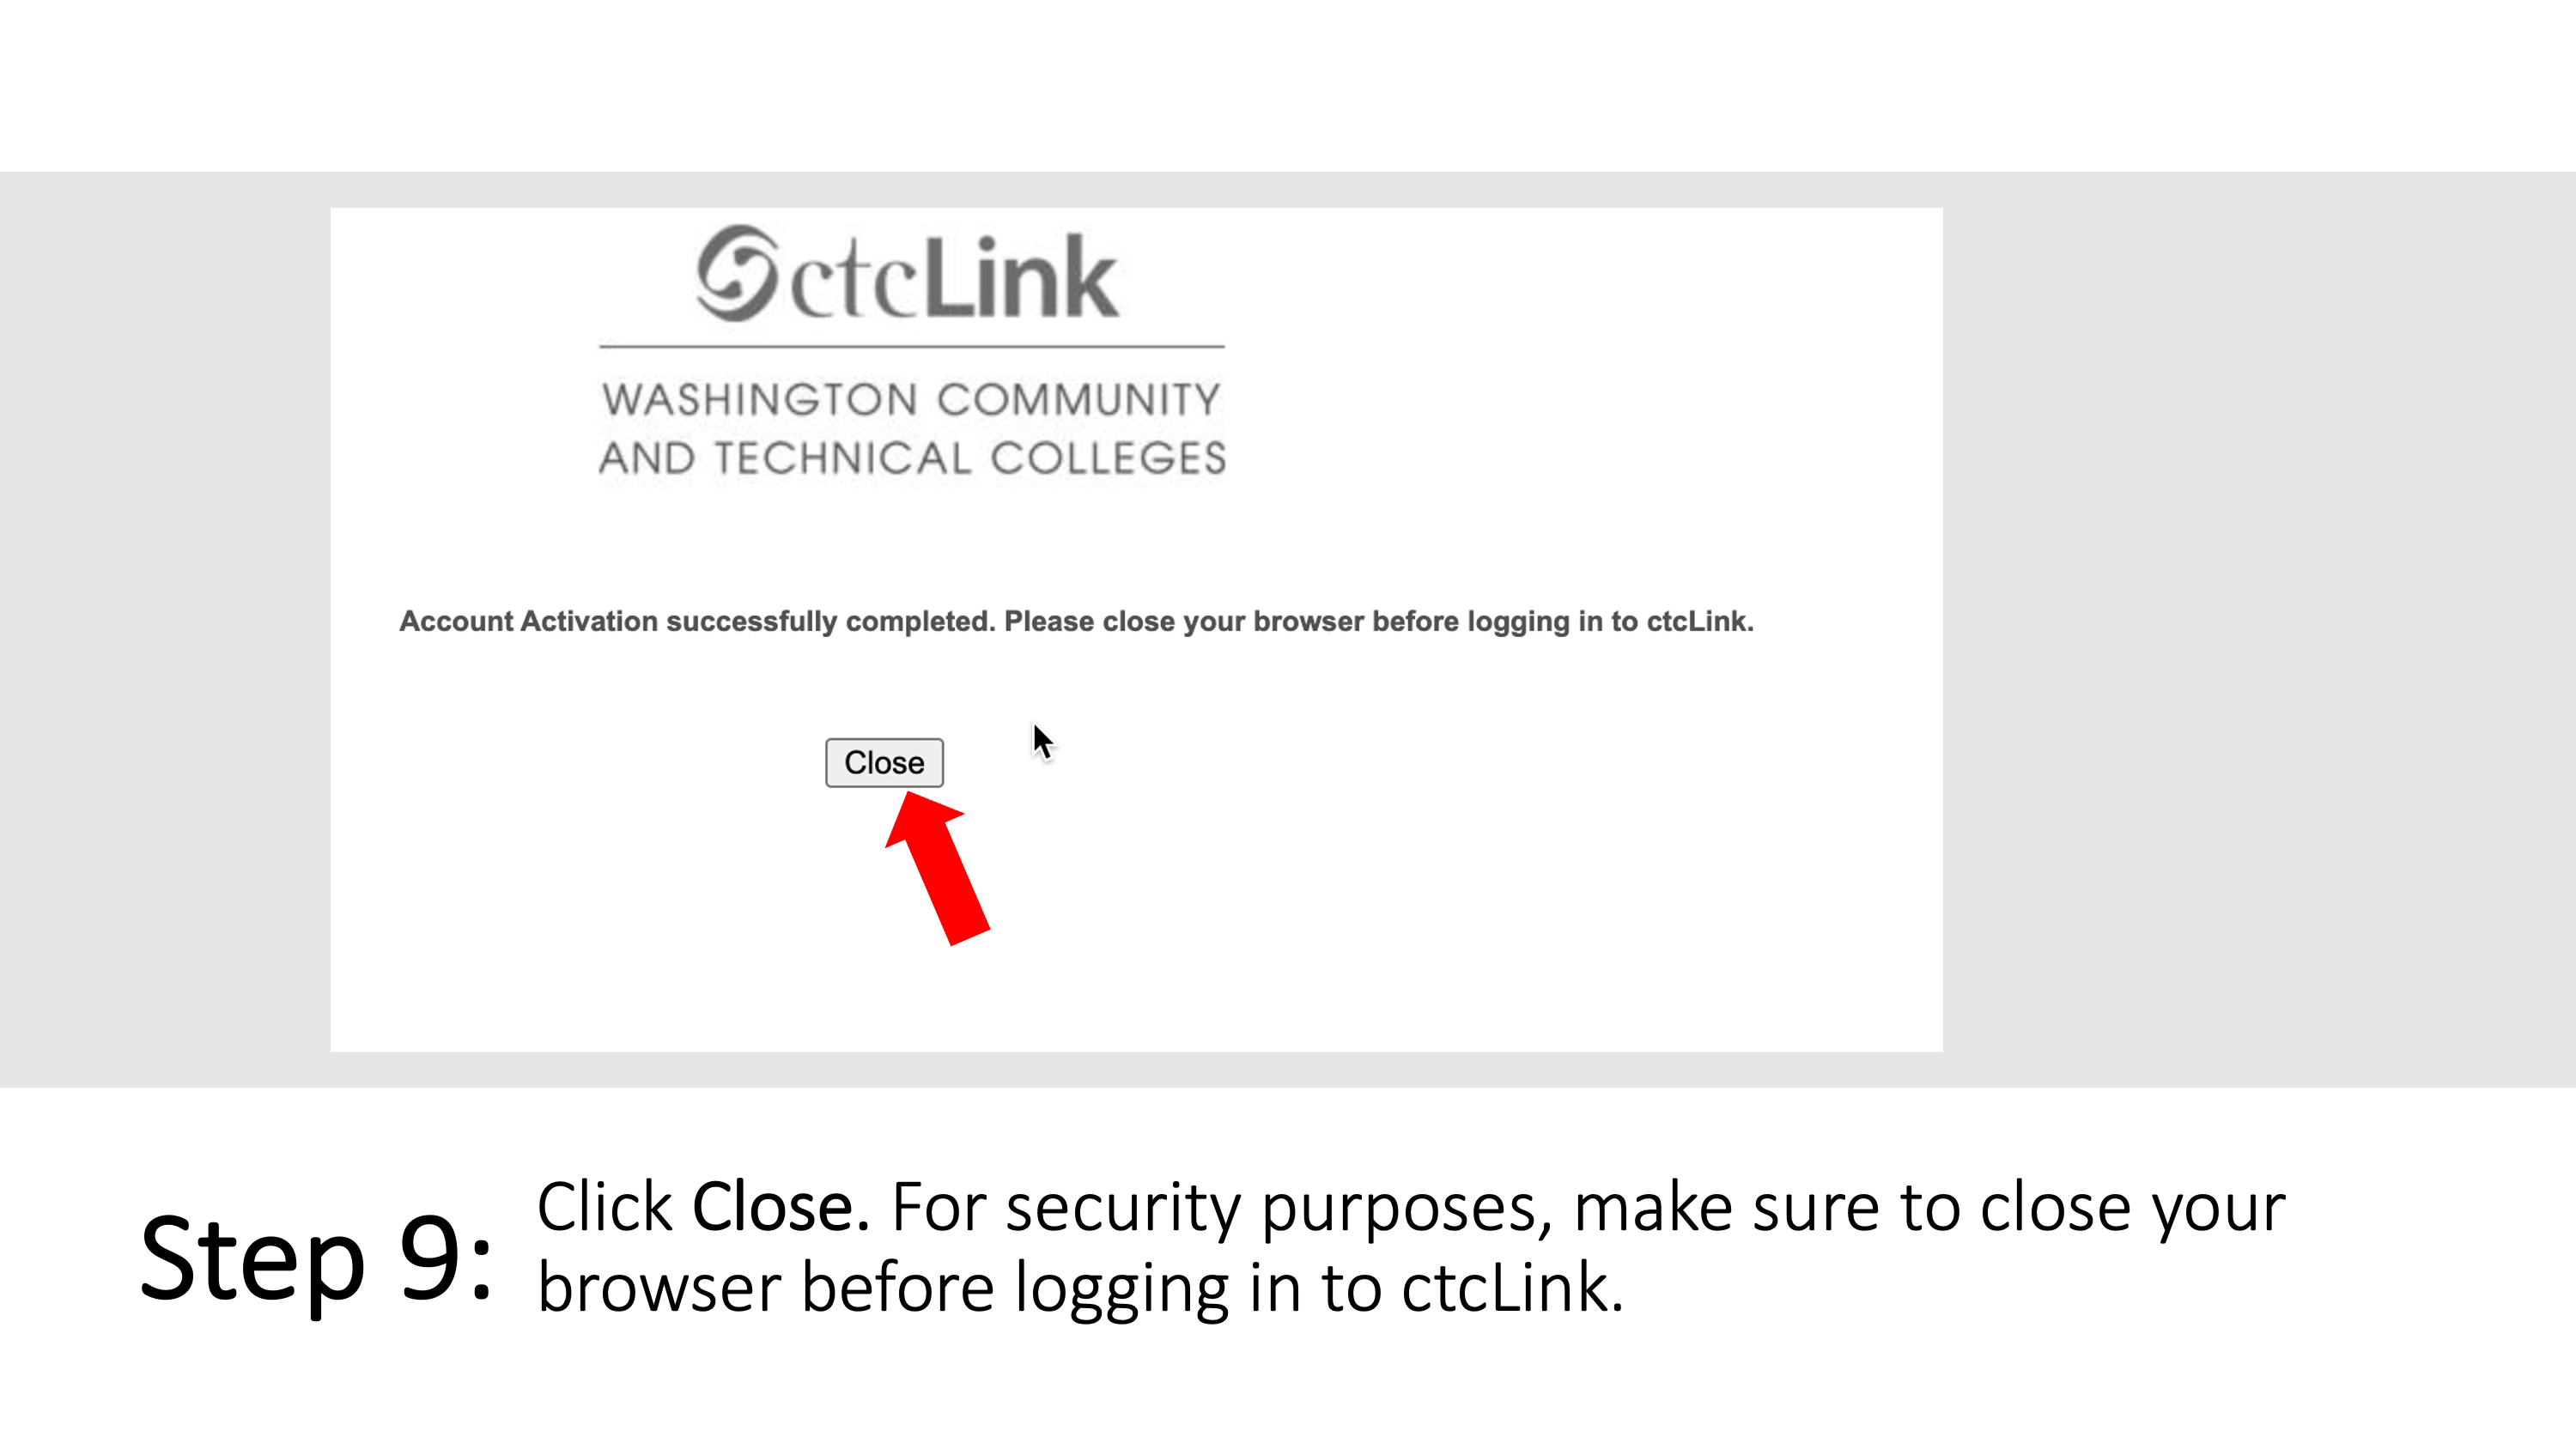 Step 9: Click Close. For security purposes, make sure to close your browser before logging in to ctcLink.